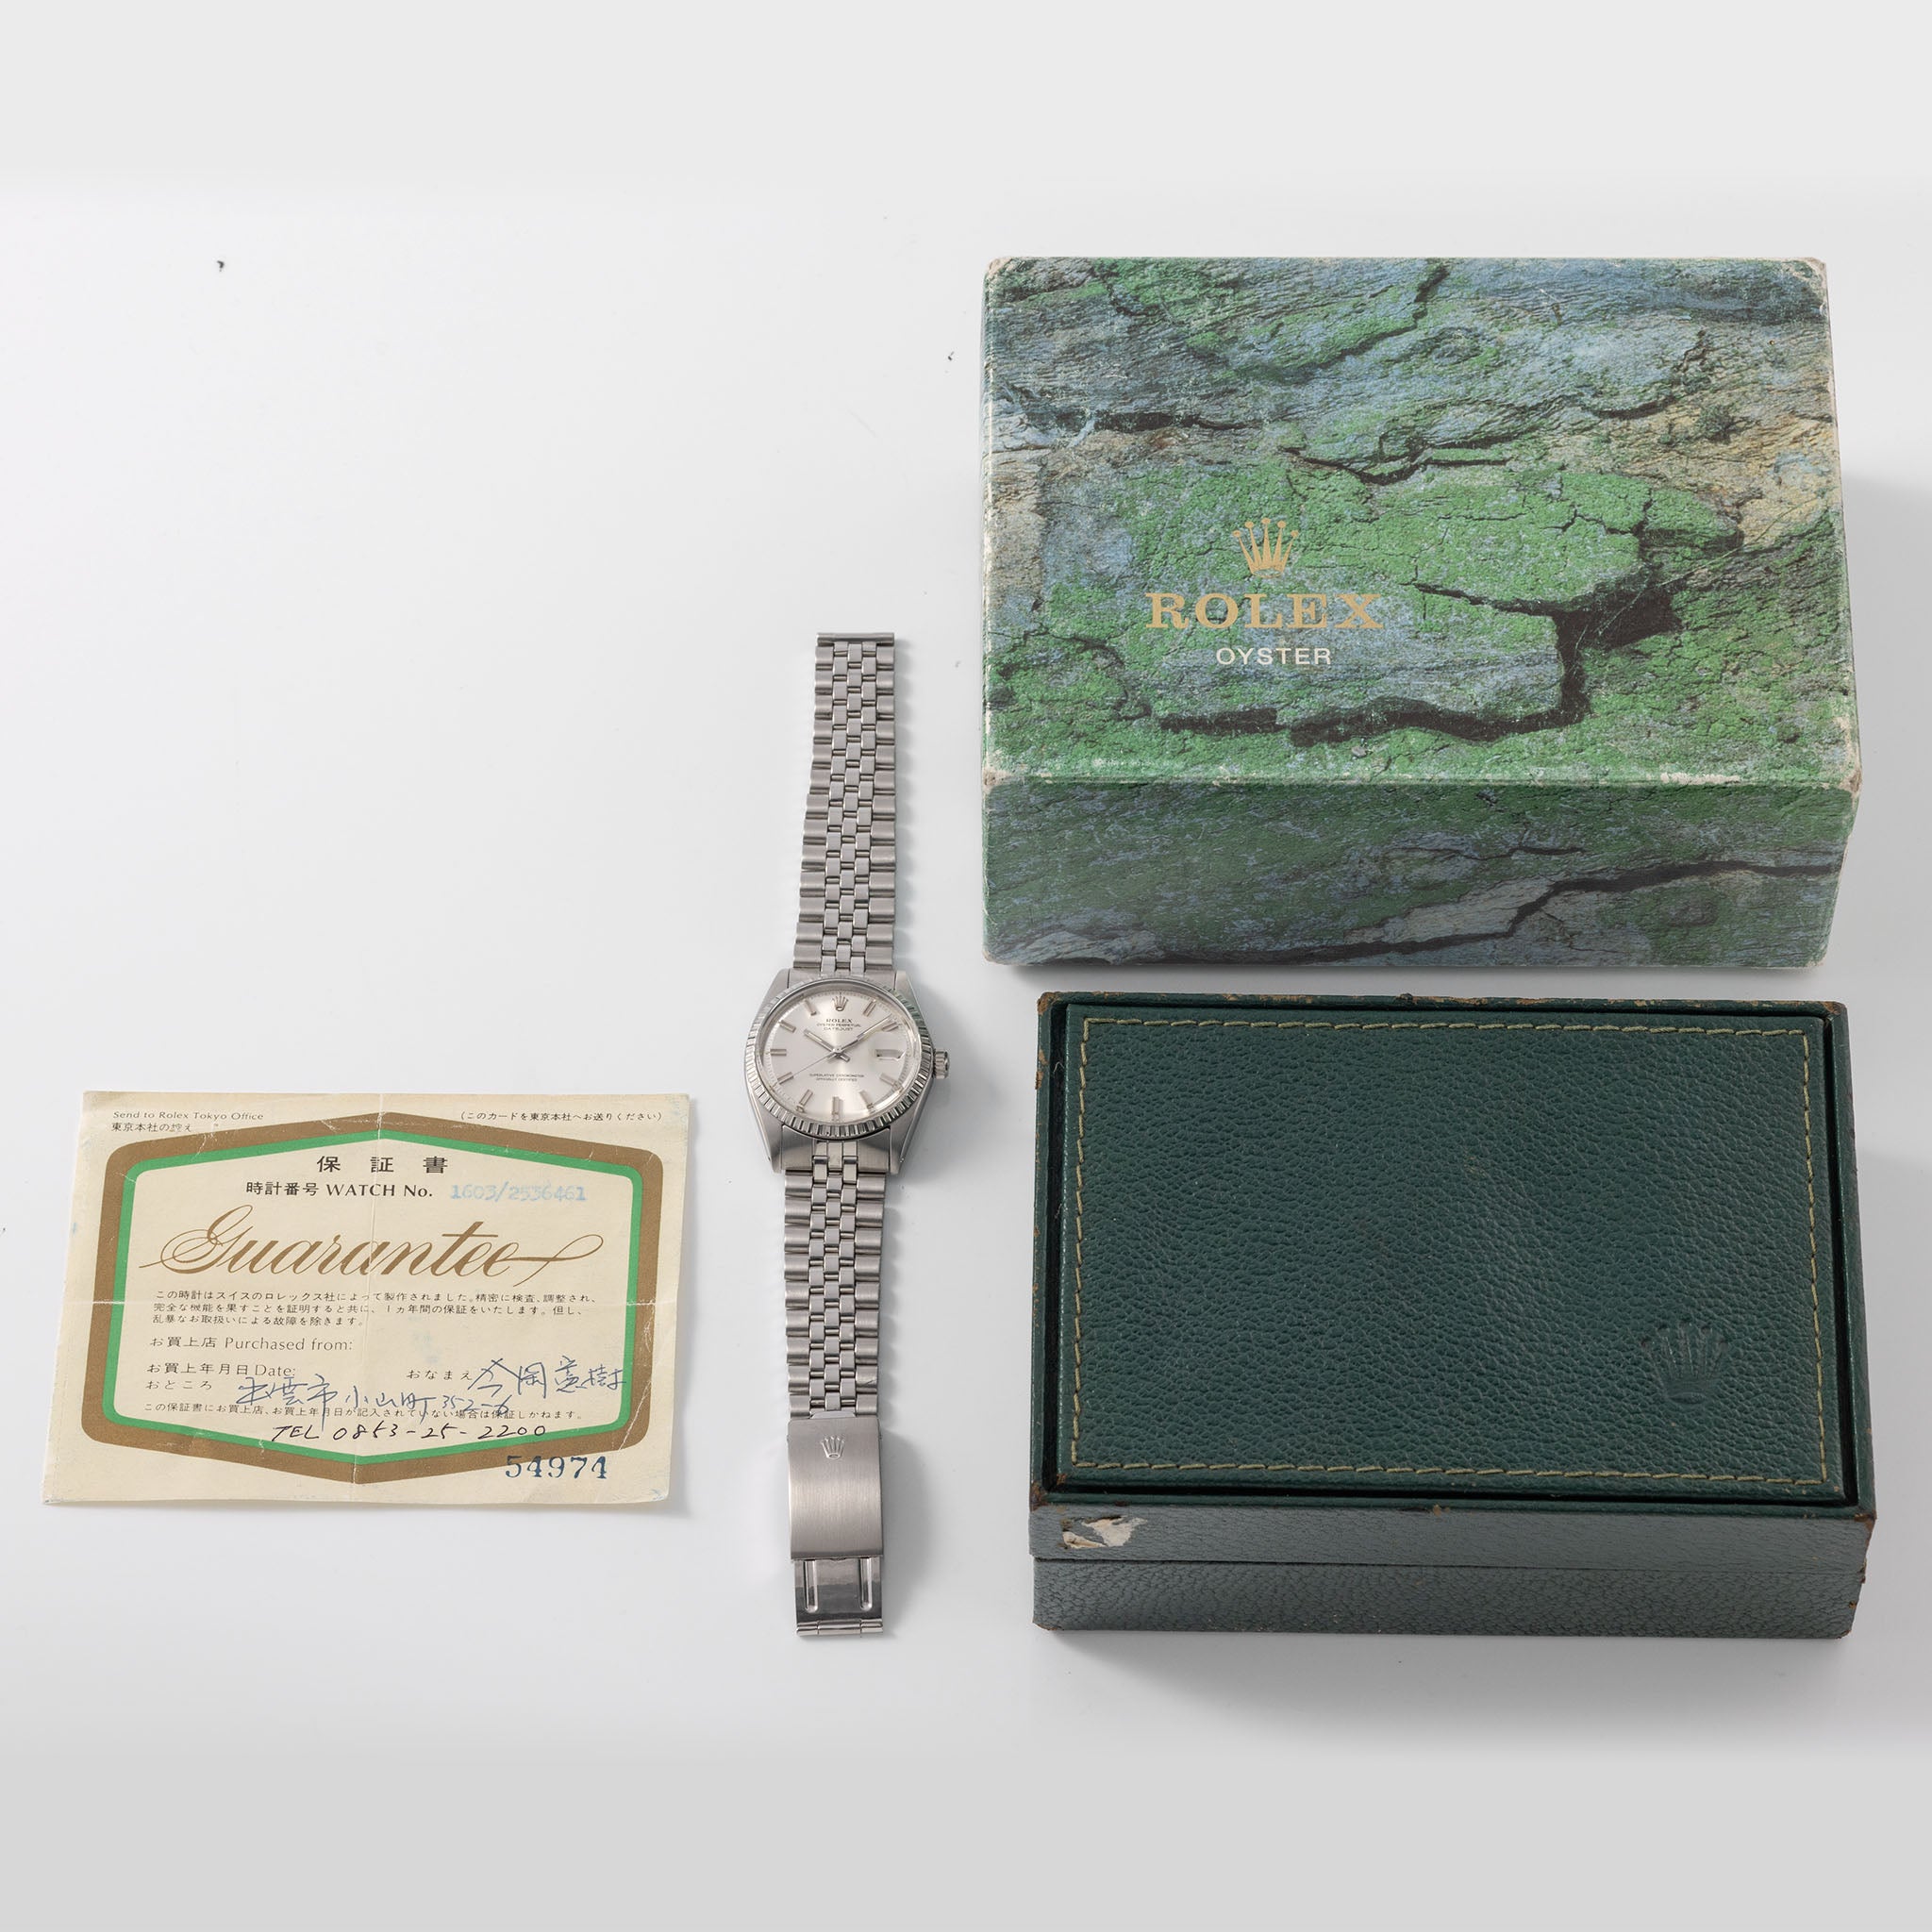 Rolex Datejust Wide Boy Dial Box and Paper Set ref 1603